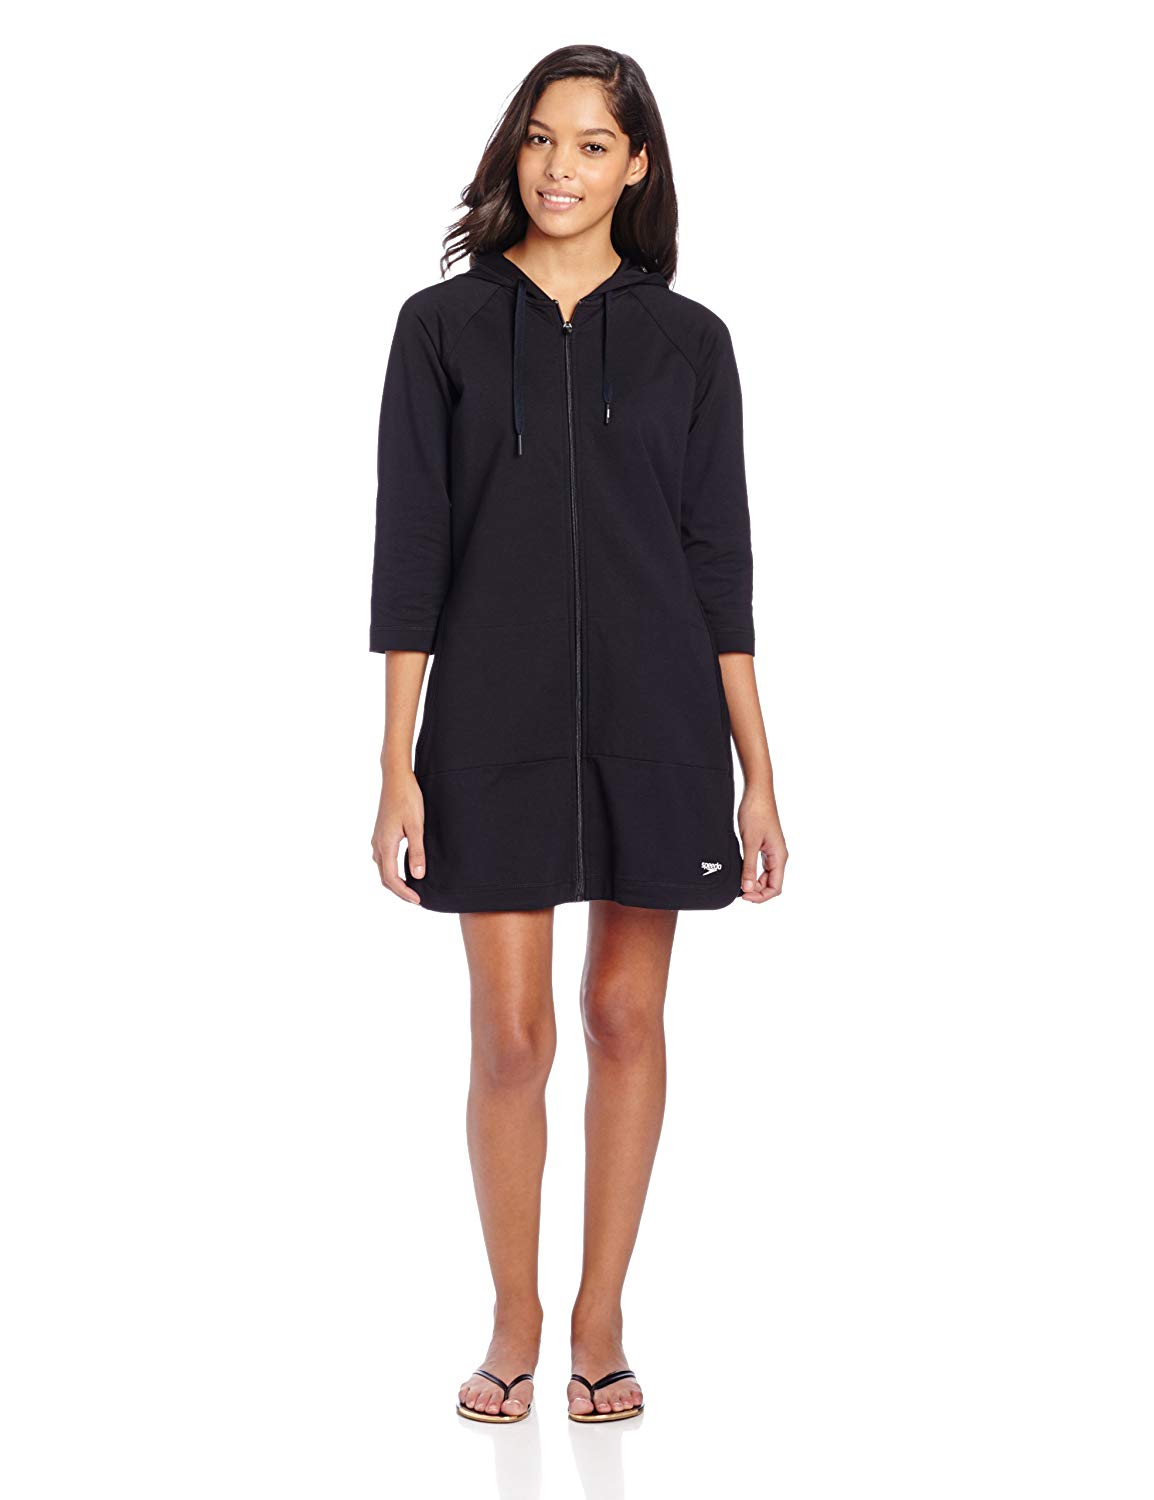 Speedo Womens Aquatic Fitness Robe Cover-Up with Hood Black Small 7237139